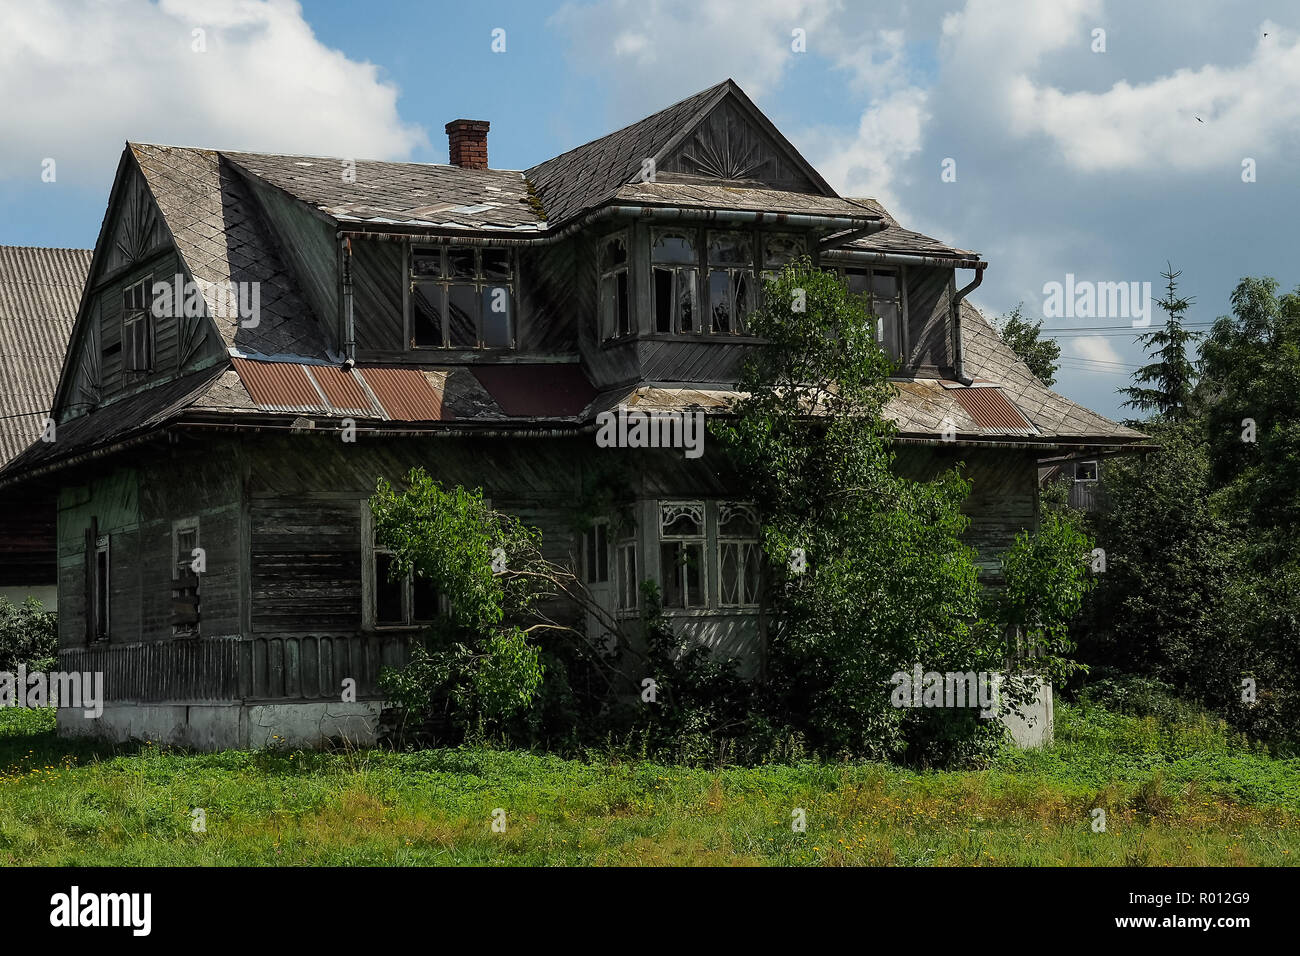 old, wooden abandoned house Stock Photo